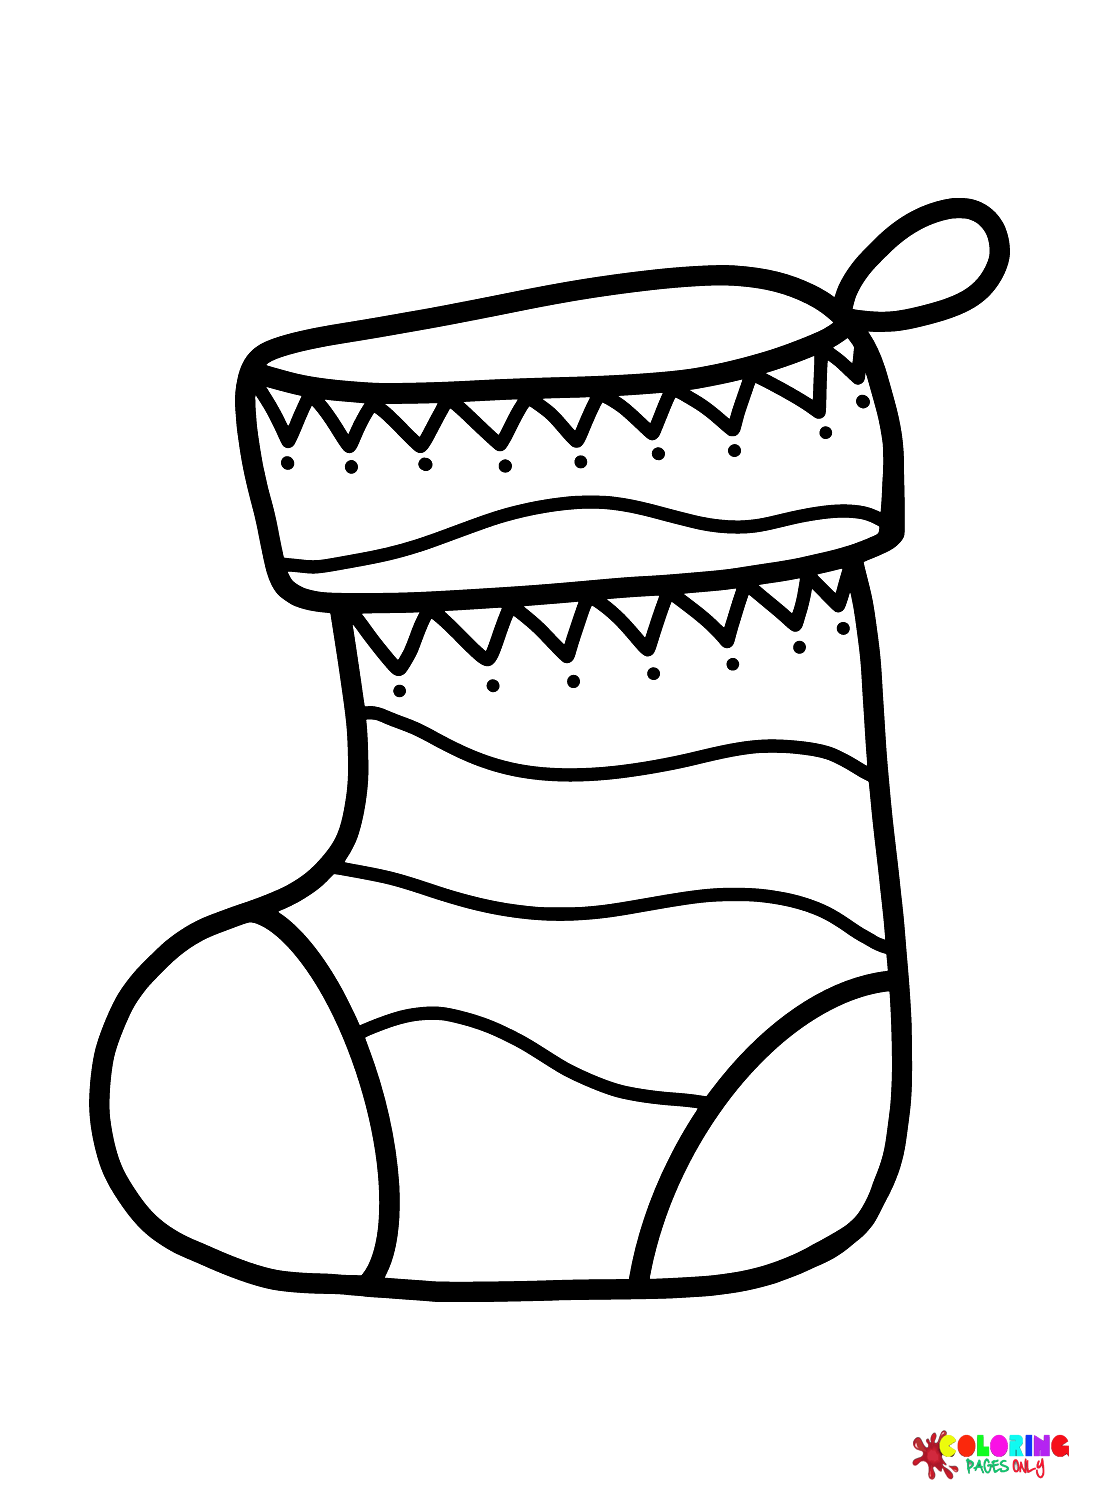 Pictures Christmas Socks Coloring Pages - Socks Coloring Pages ...